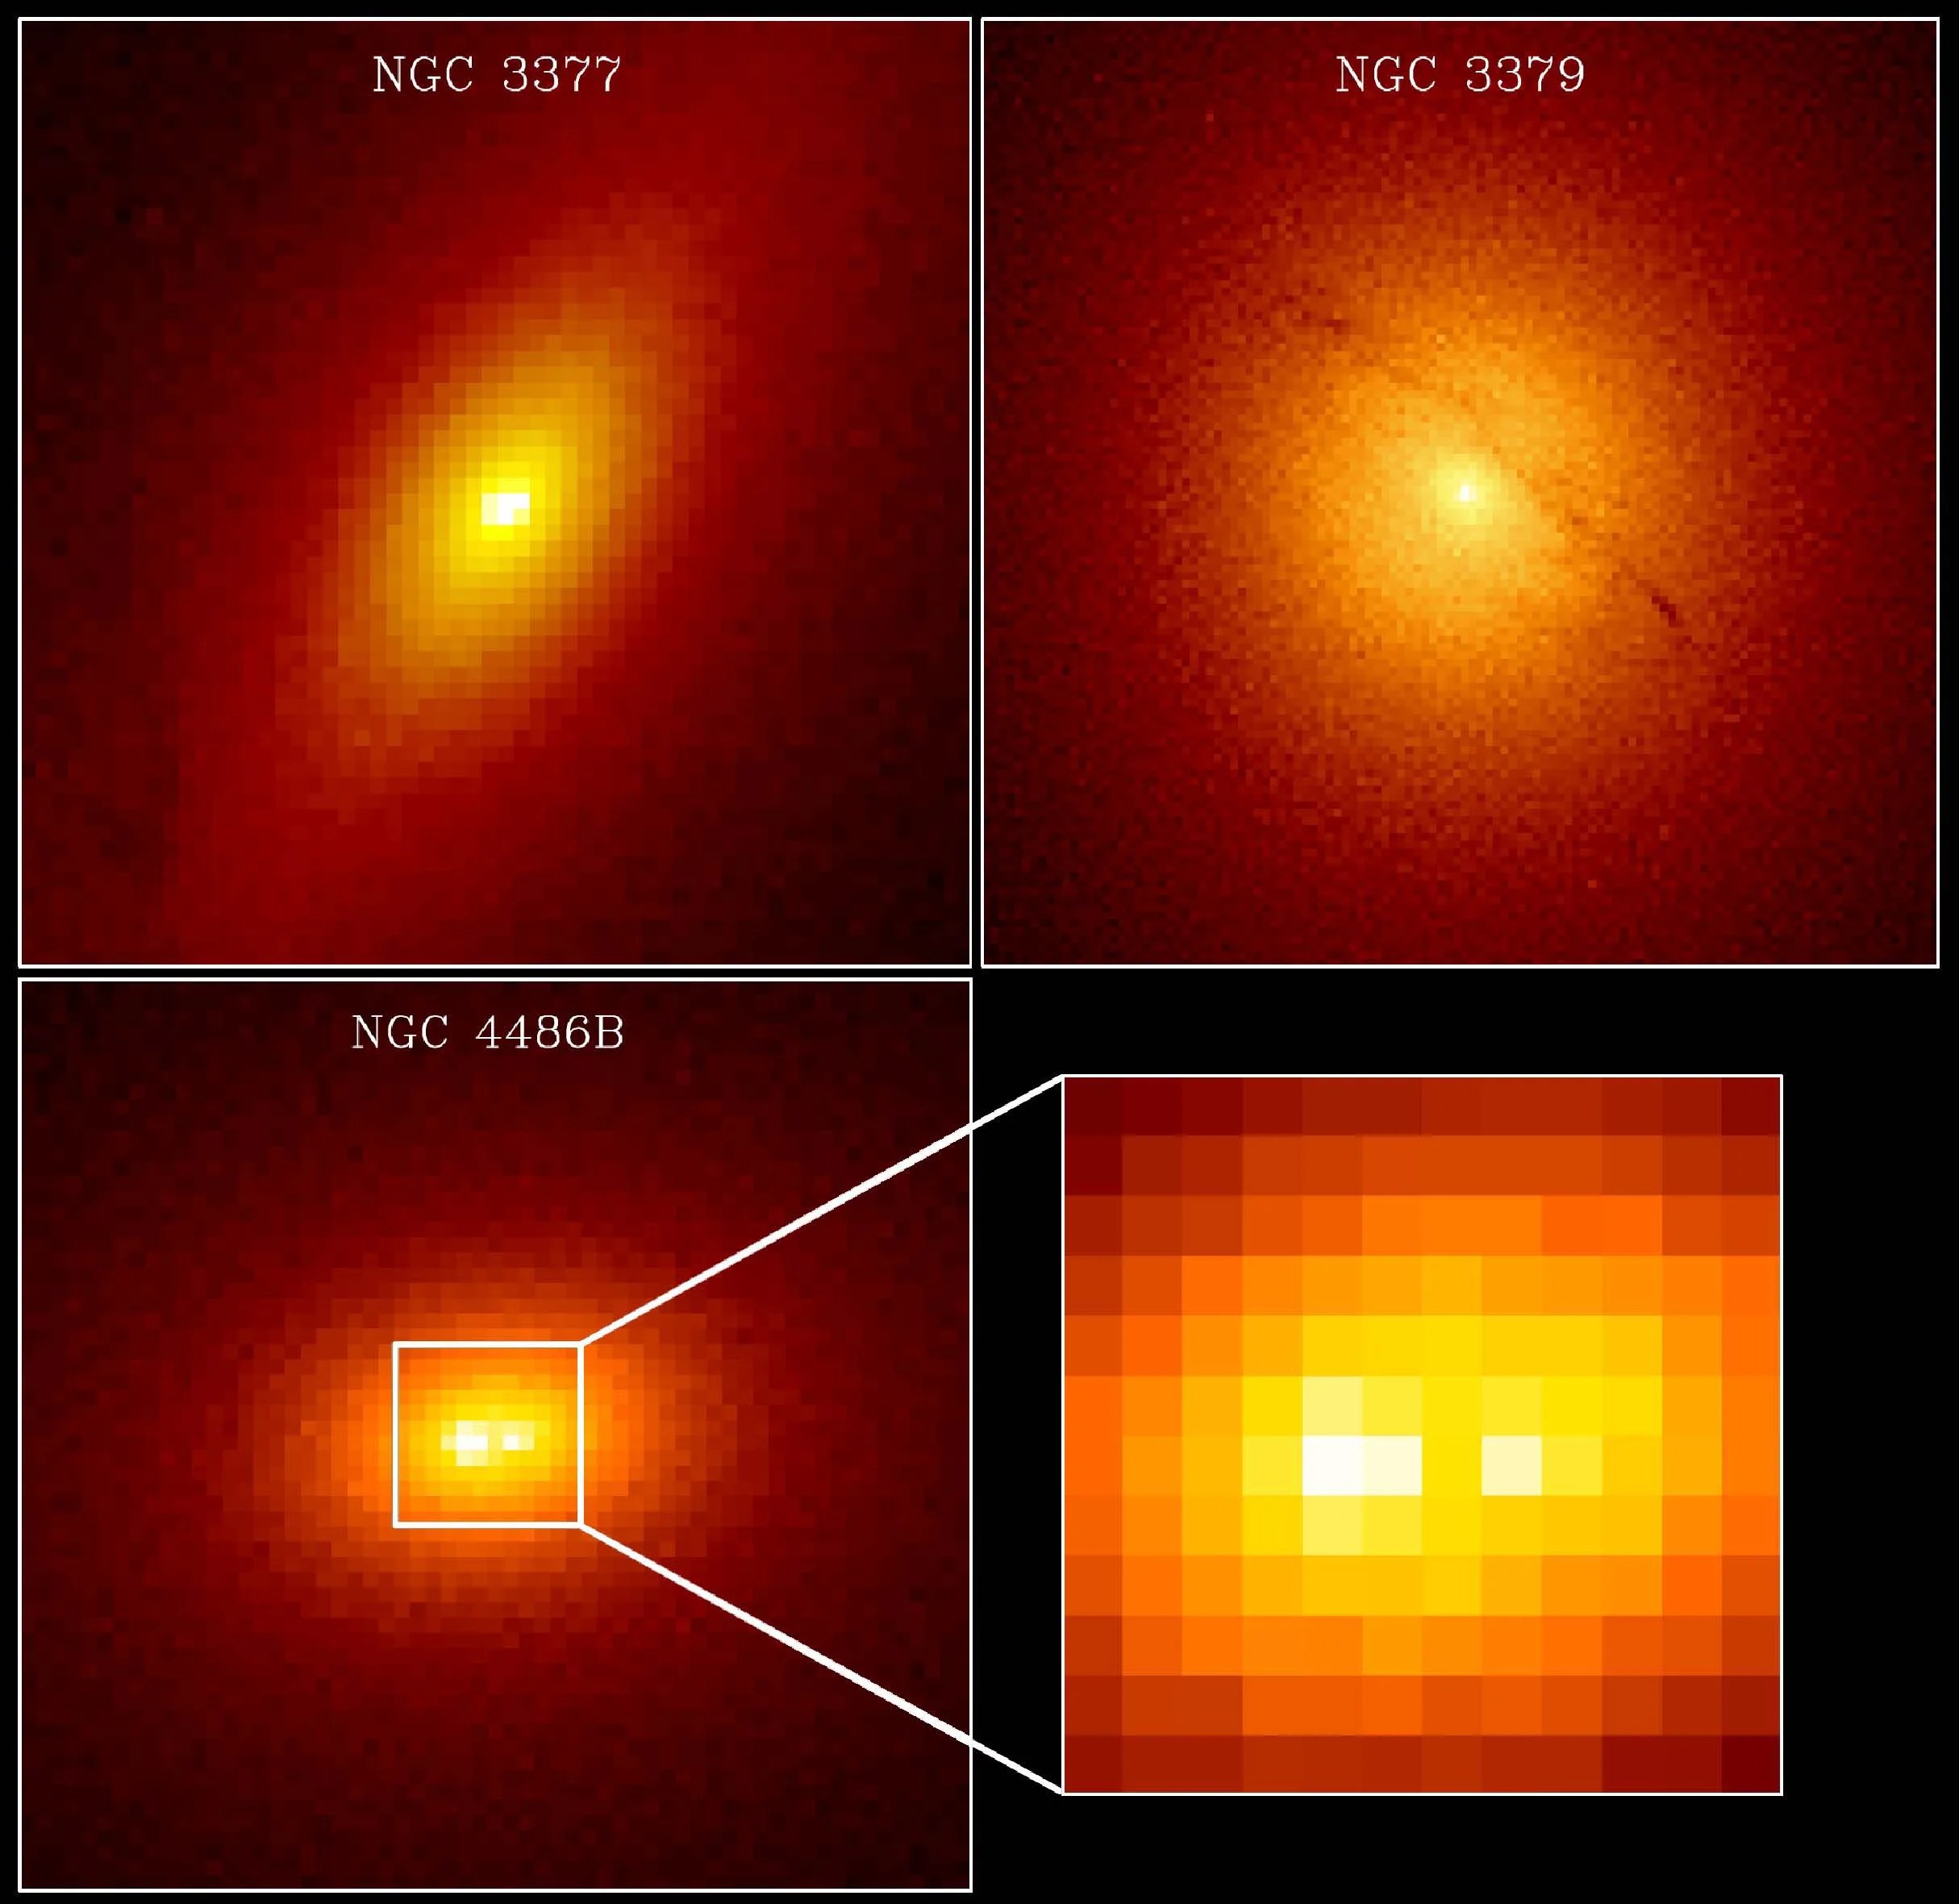 Four quadrants. The upper two hold images of the galaxies NGC 3377 (left) and NGC 3379 (right). The bottom left quadrant holds and image of the galaxy NGC 4486B. The lower-right quadrant shows an expanded view of NGC 4486B's center.  Each image holds a bright-yellow core surrounded by more diffuse a yellow, then orange, and later red glow. 